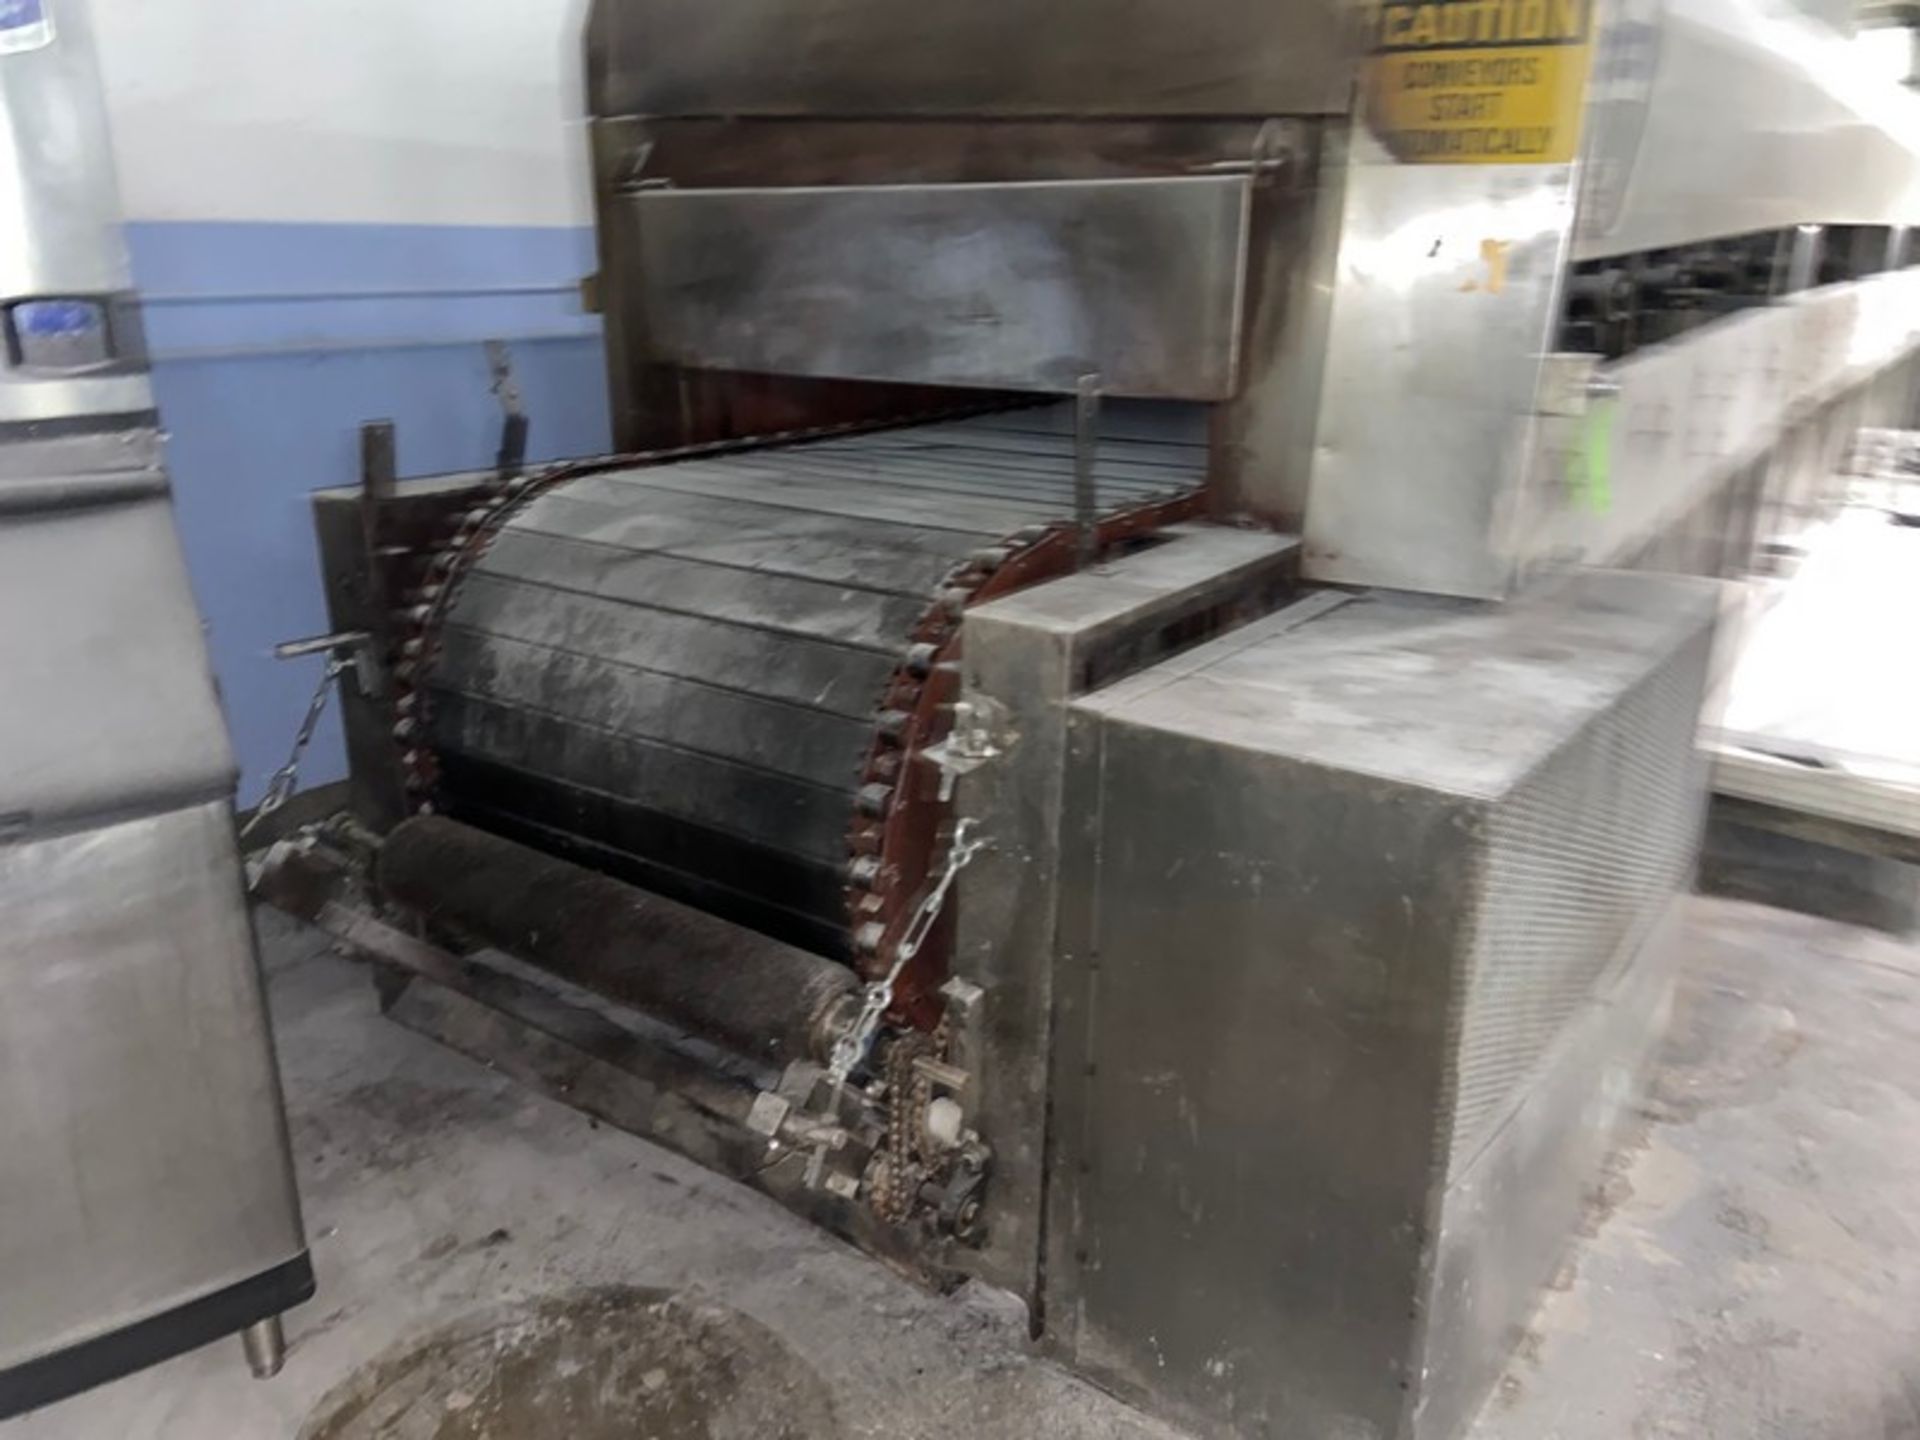 H. Babb Co. Inc. S/S Oven, with Aprox. 37" W Conveyor Belt, Product Opening: Aprox. 7" H (Top of - Image 2 of 13